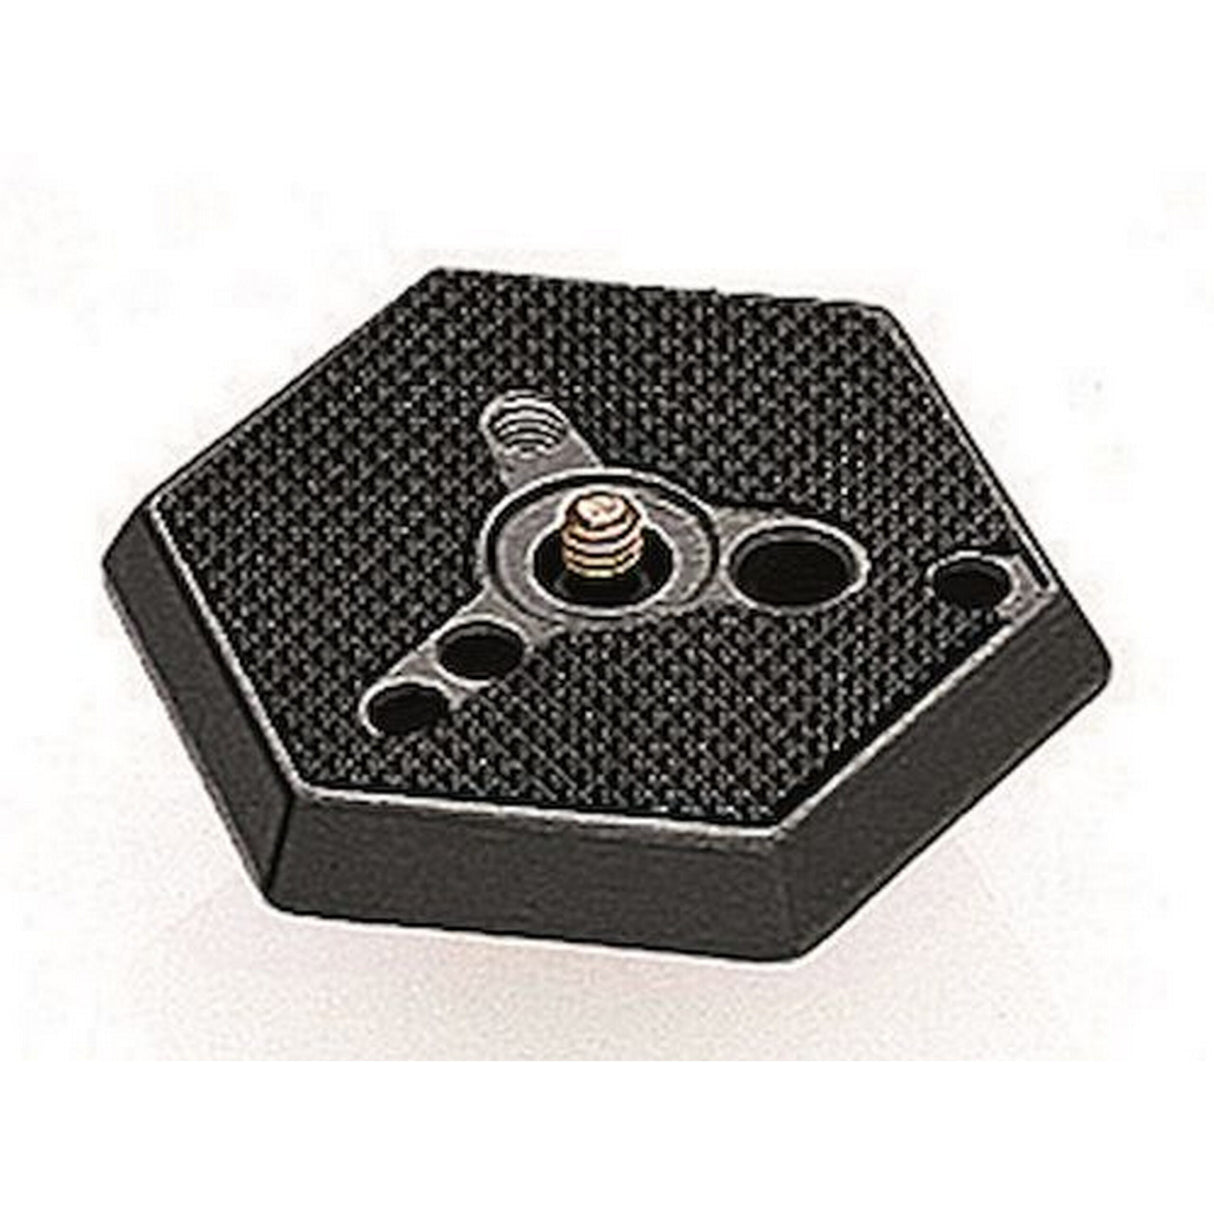 Manfrotto 030-38 Hexagonal Plate for 029